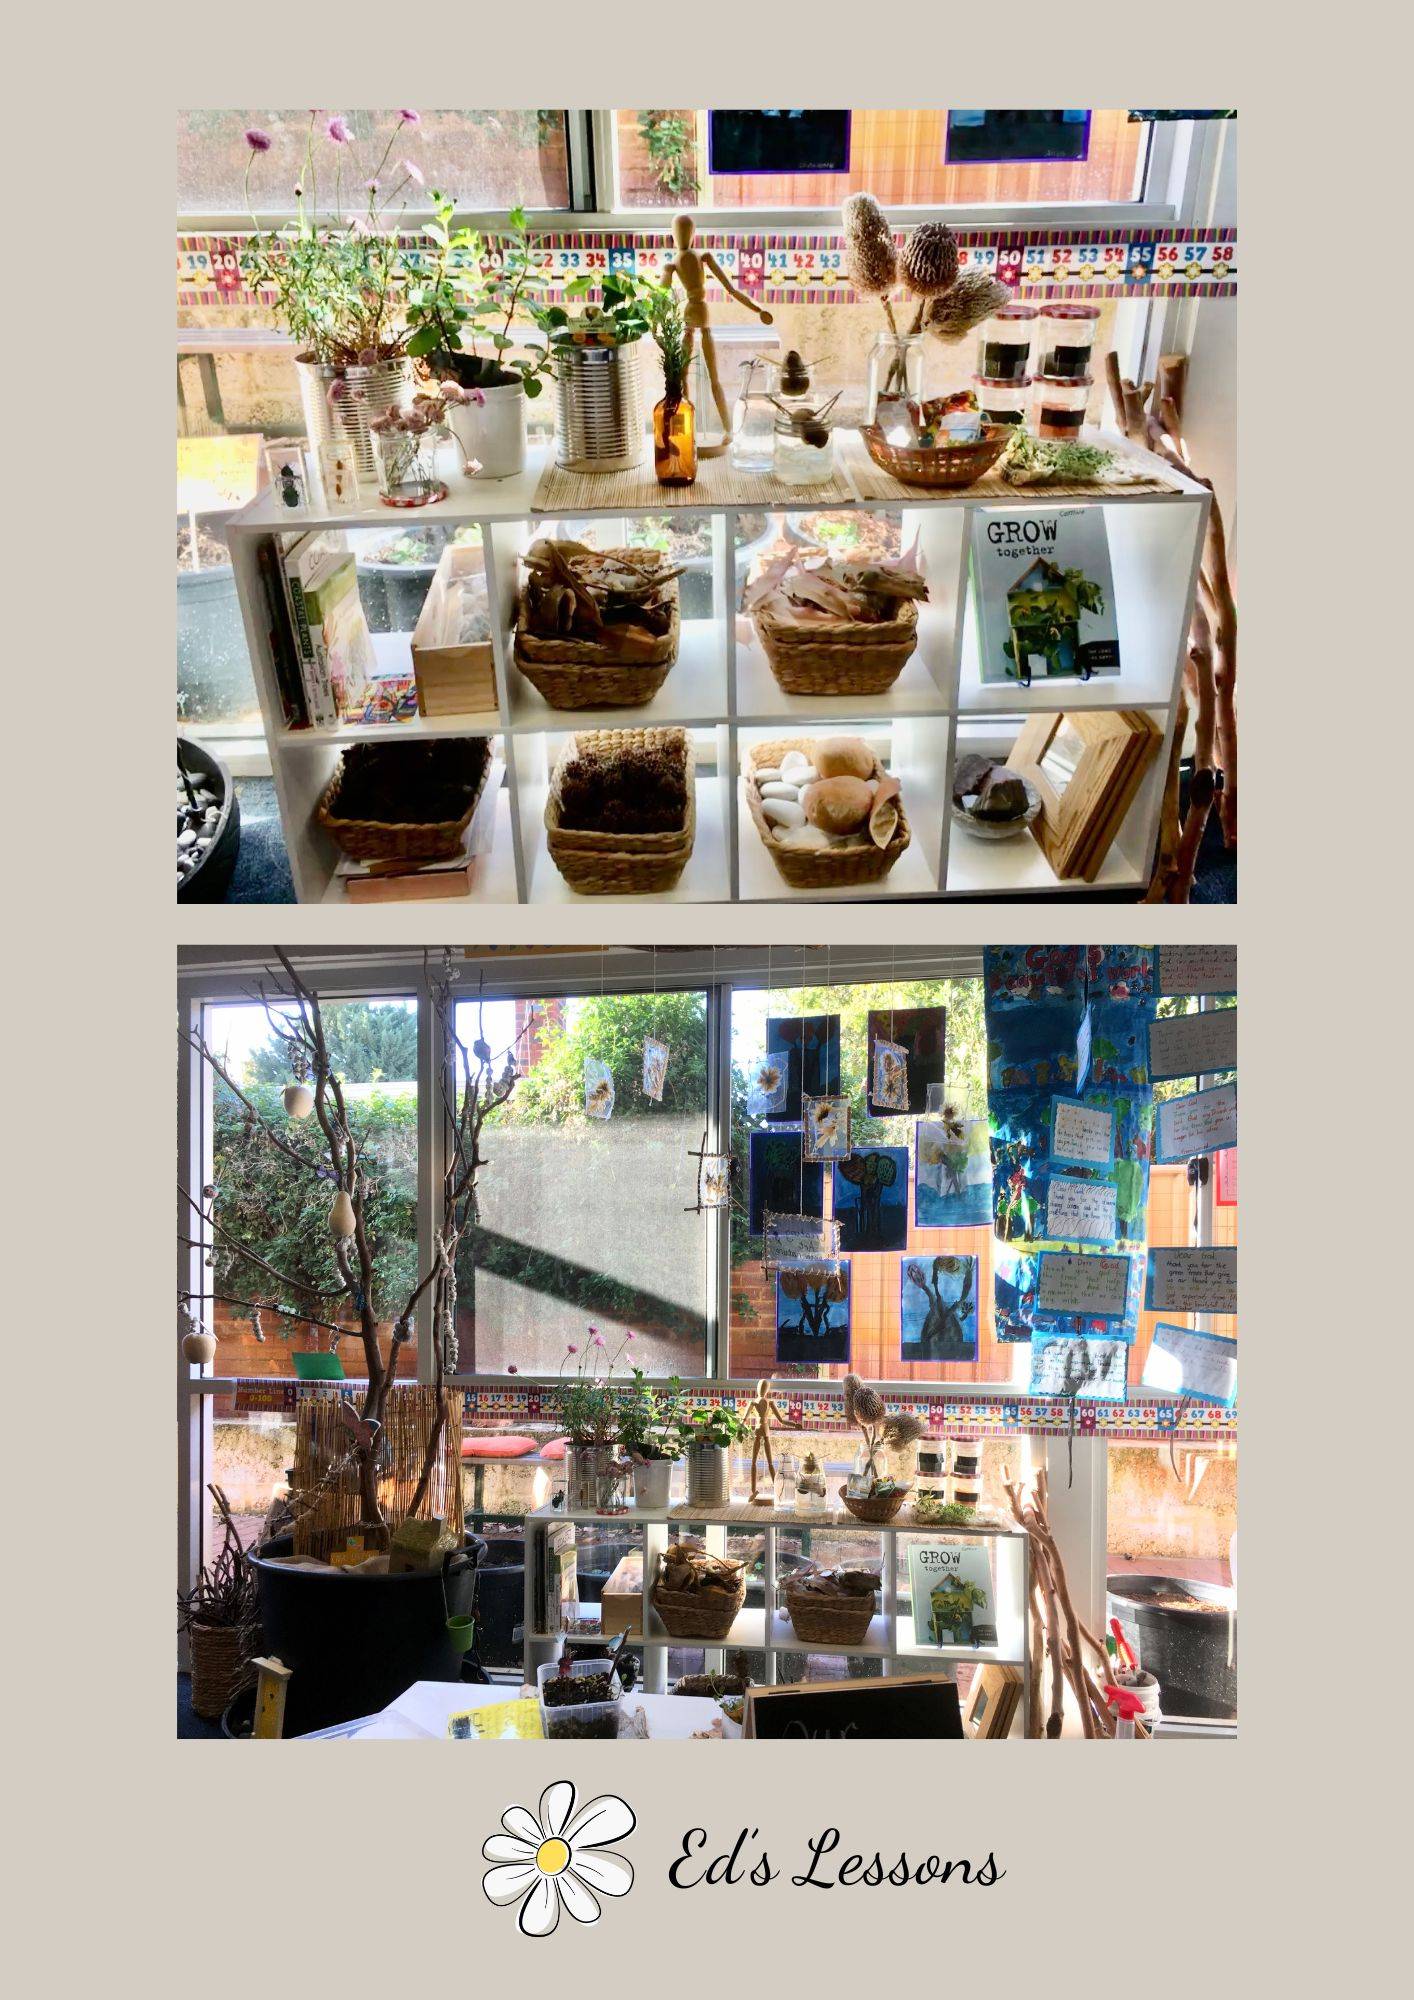 Inspiring indoor learning space with objects from nature